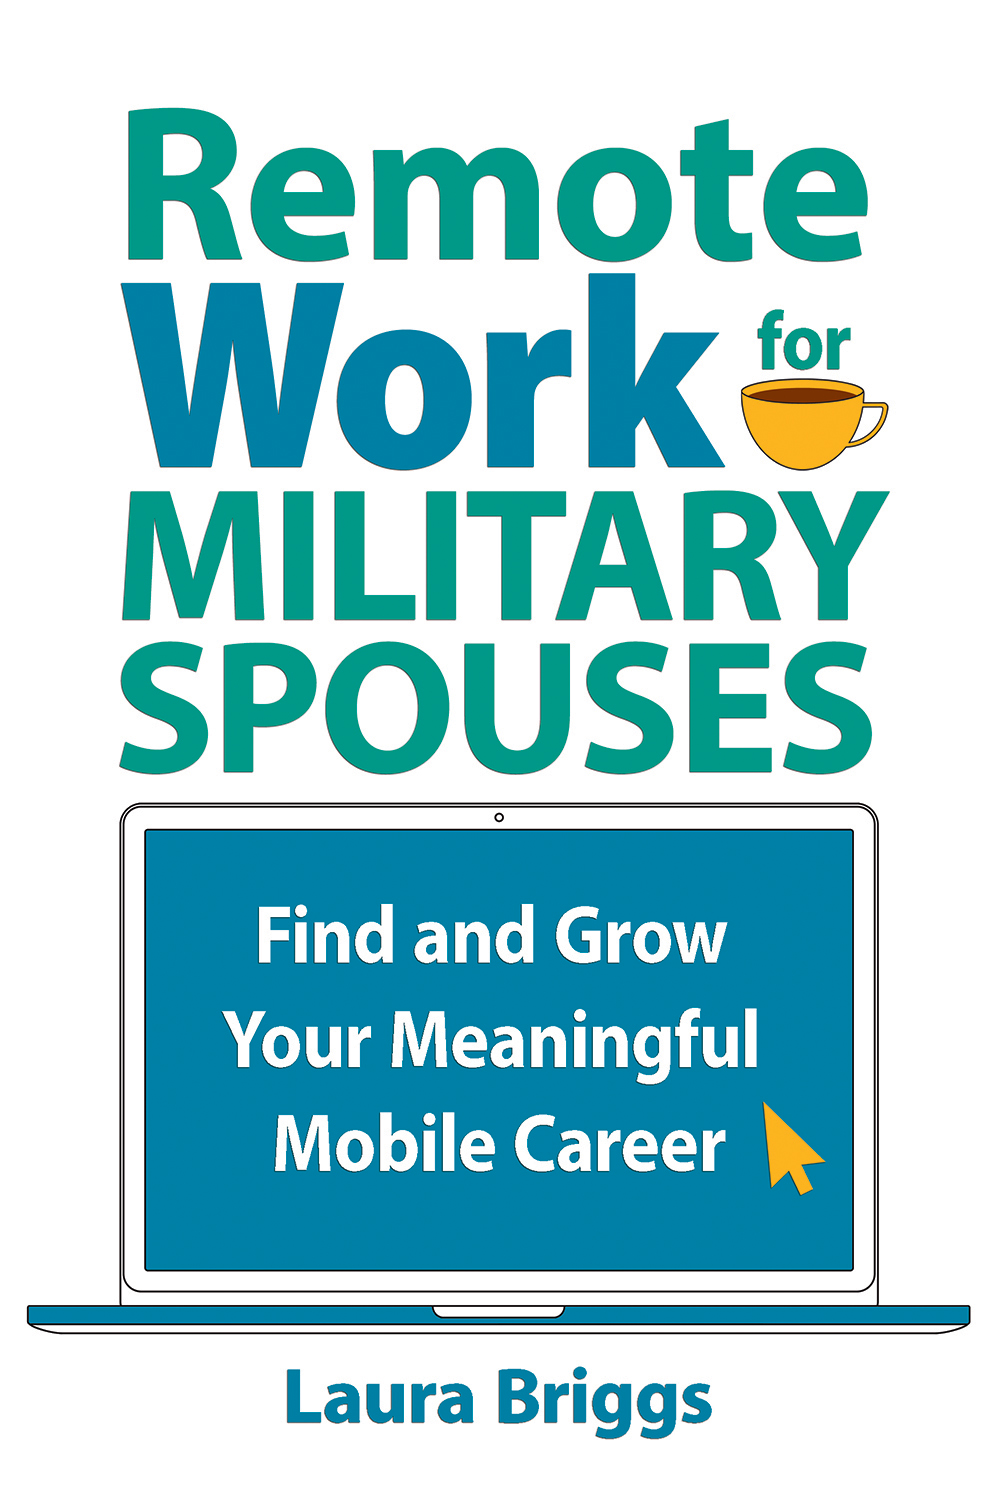 Remote Work for Military Spouses: Find and Grow Your Meaningful Mobile Career by Laura Briggs, published by Elva Resa Publishing